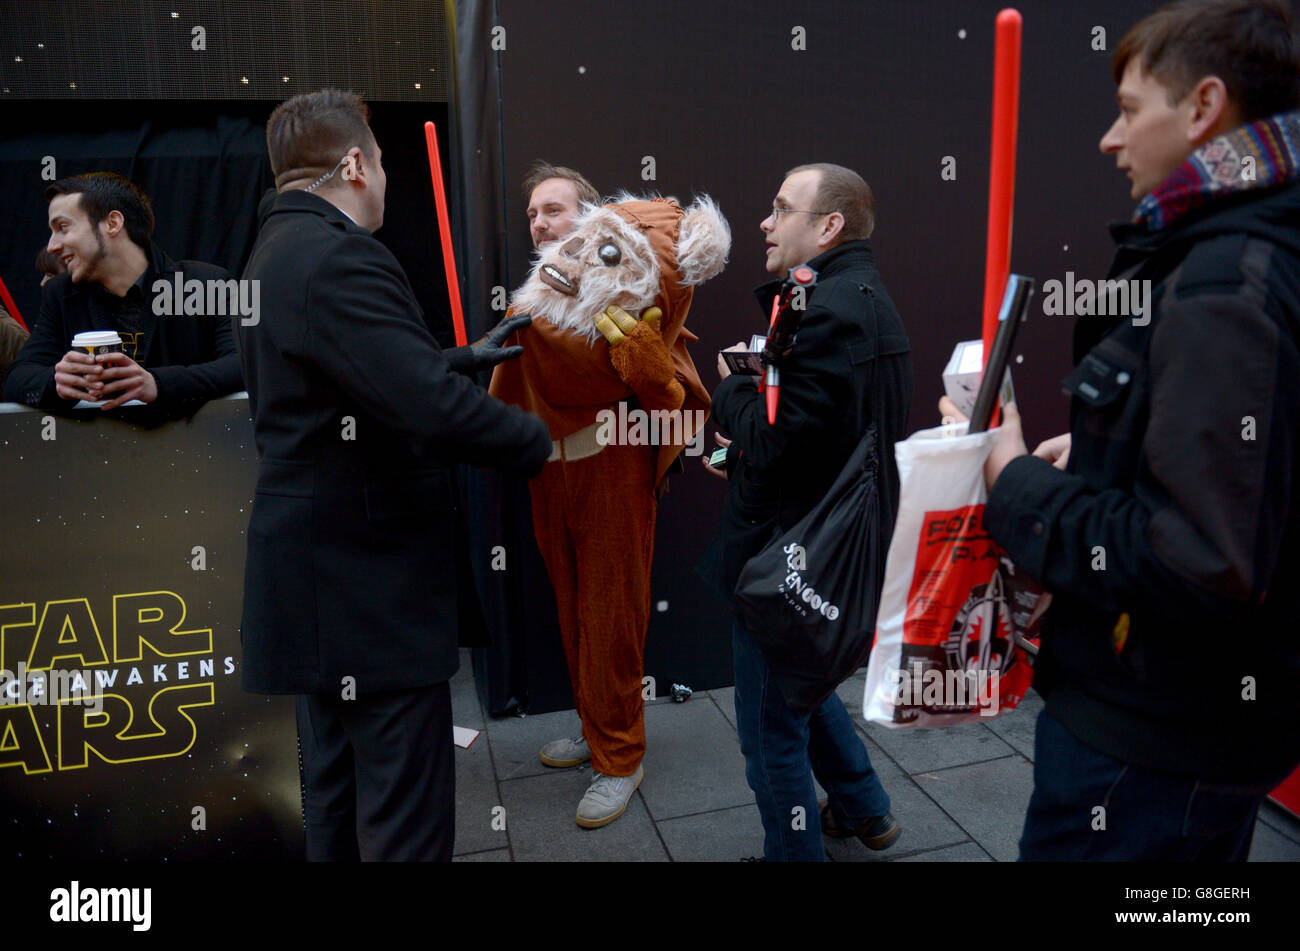 A fan in an Ewok costume attending the Star Wars: The Force Awakens European Premiere held in Leicester Square, London. PRESS ASSOCIATION Photo. See PA story SHOWBIZ StarWars. Picture date: Wednesday December 16, 2015. Photo credit should read: Anthony Devlin/PA Wire Stock Photo